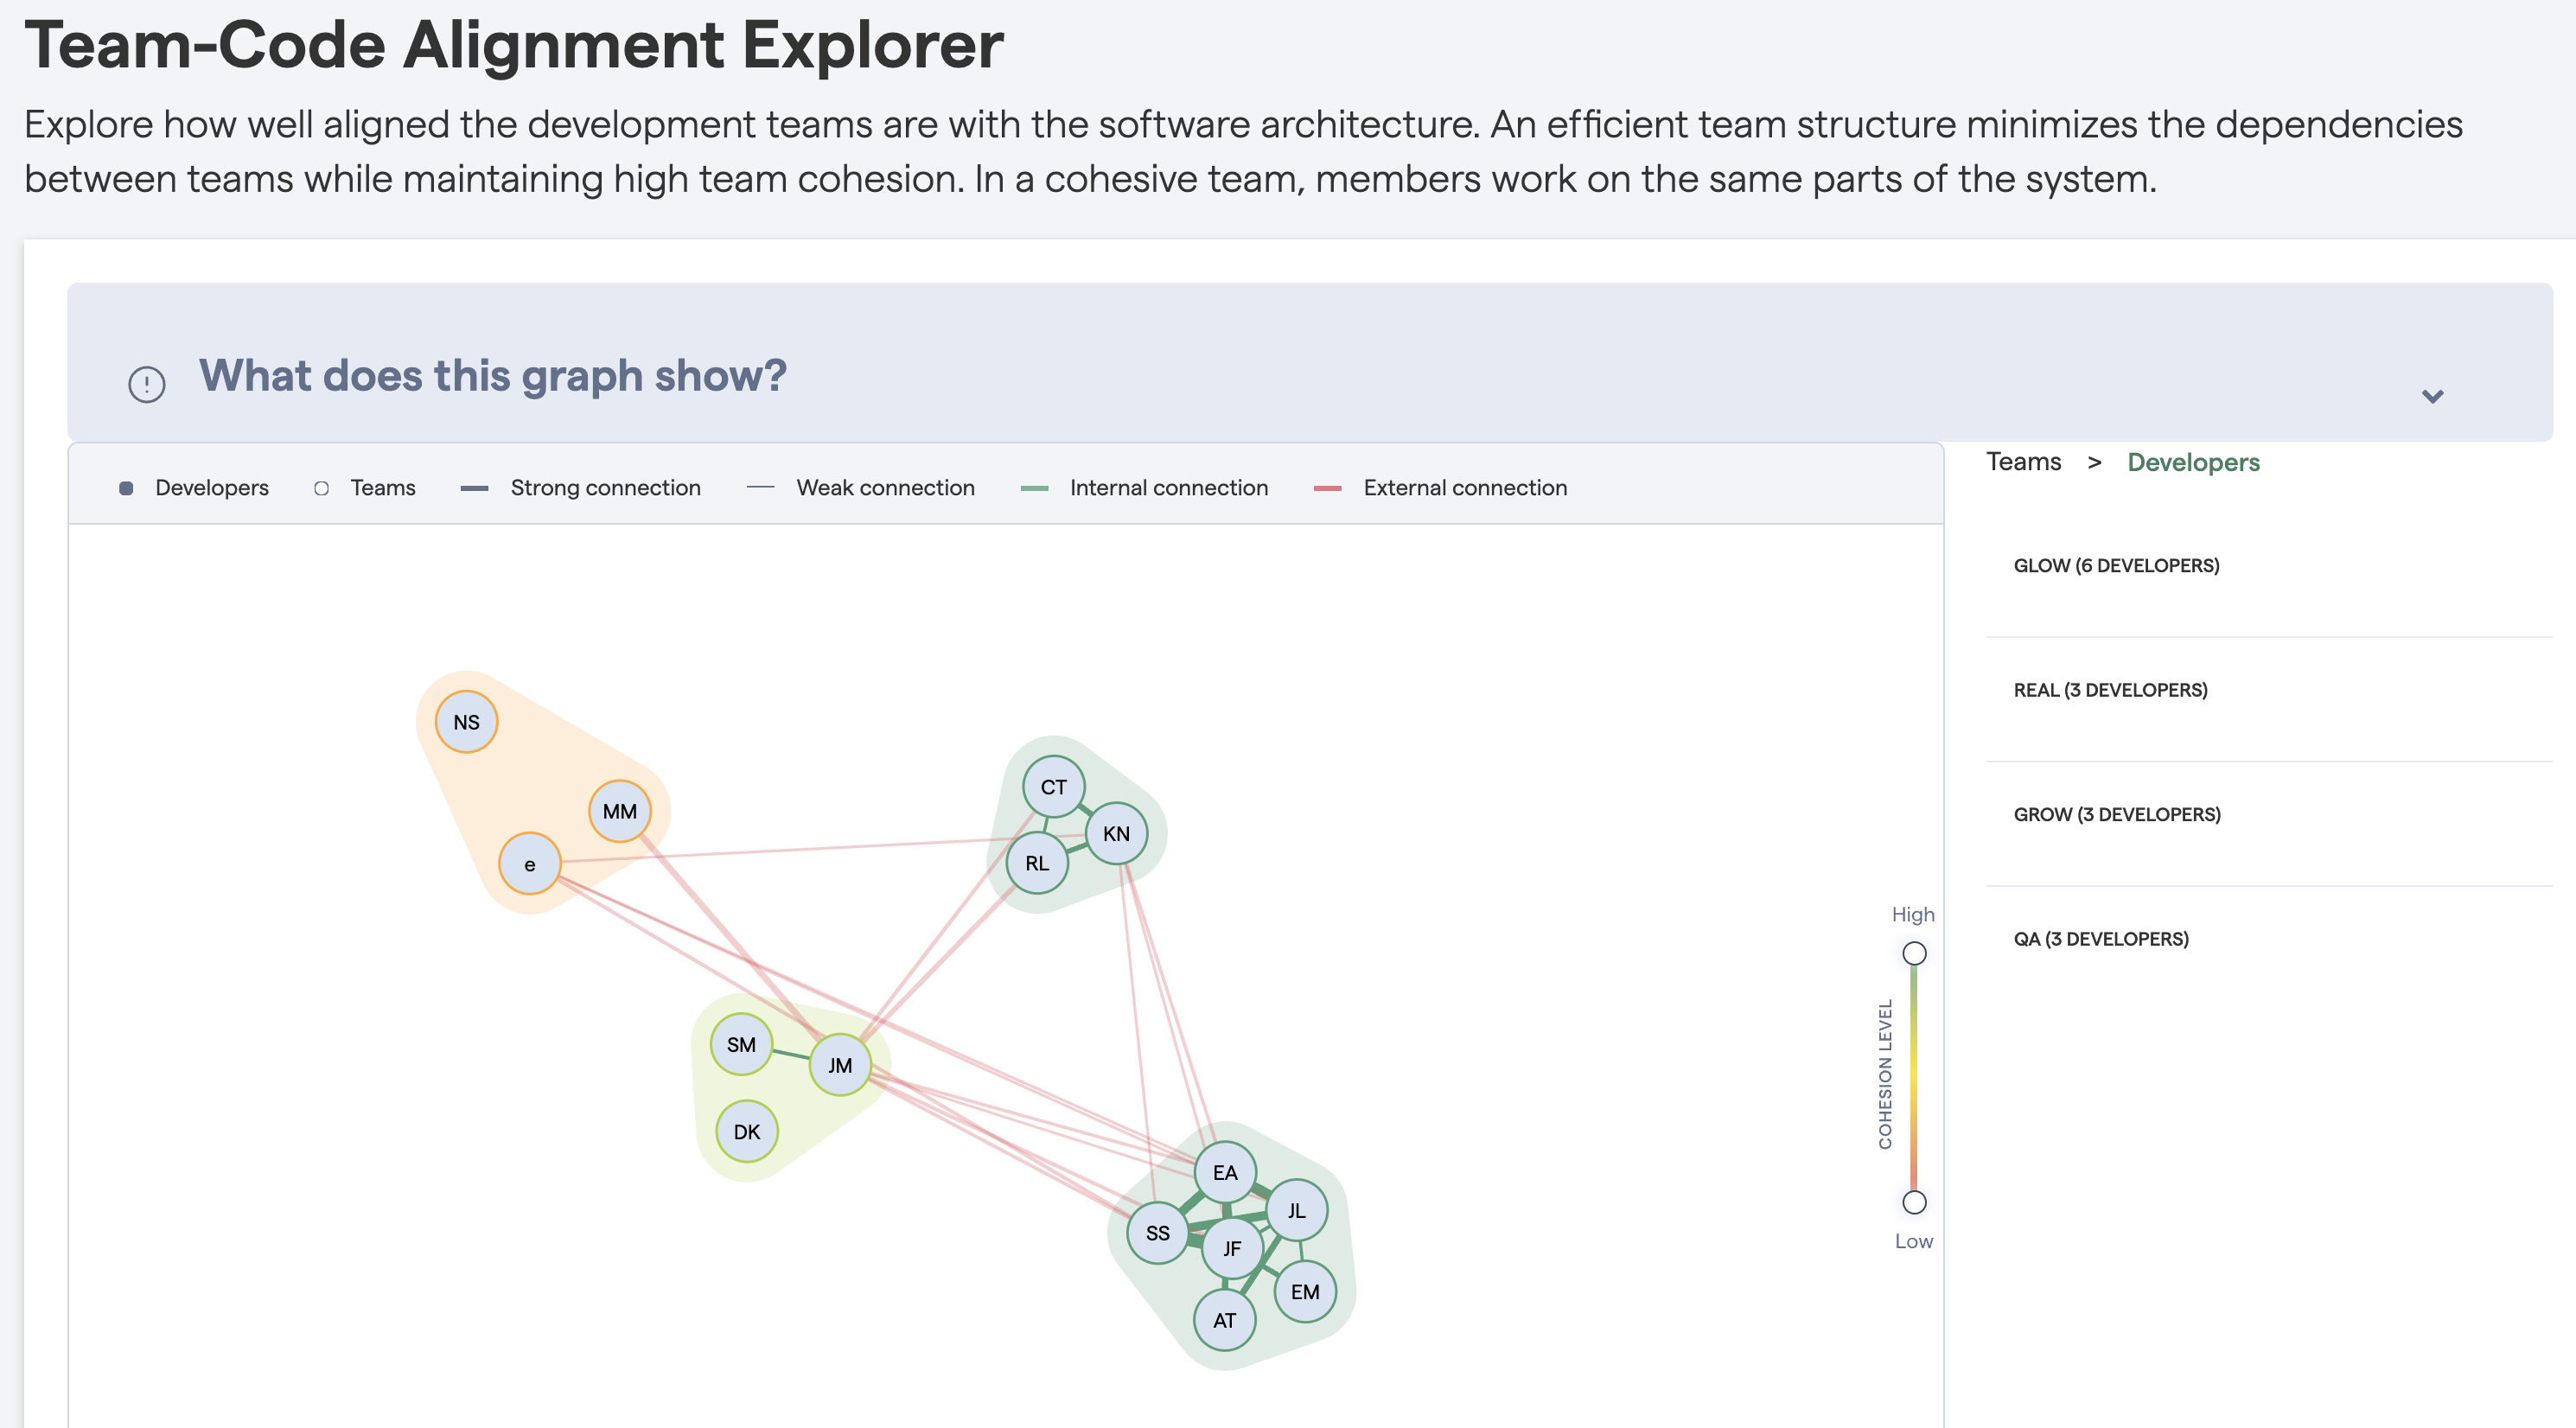 Visualize dependencies between development teams, and explore how cohesive the teams are.